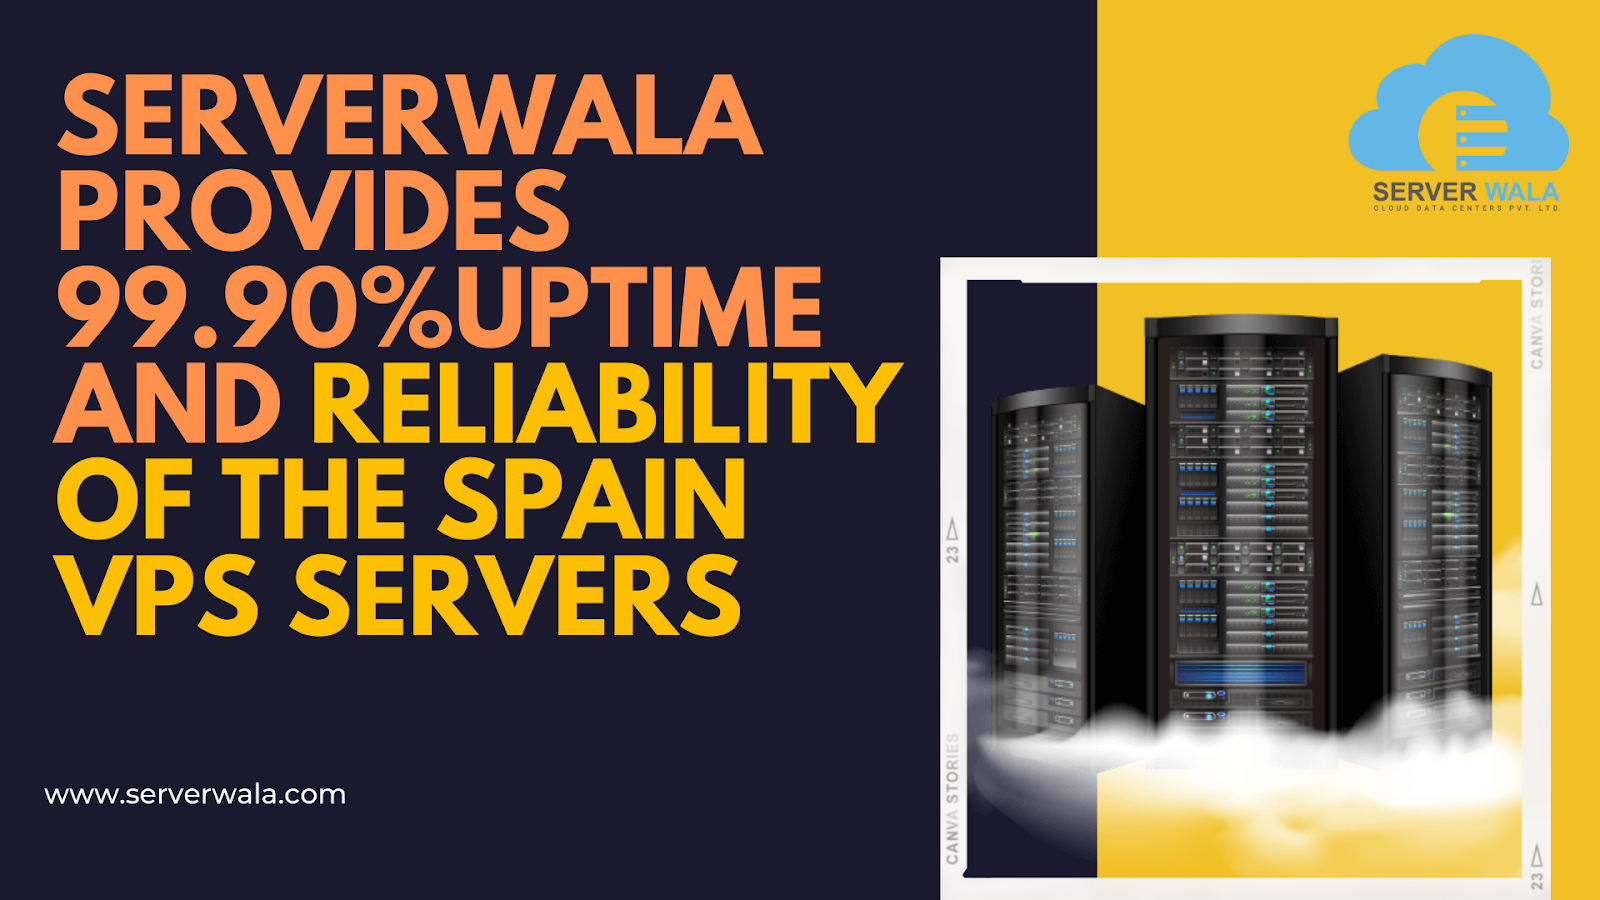 Serverwala Provides 99.90%Uptime and Reliability of The Spain VPS Servers